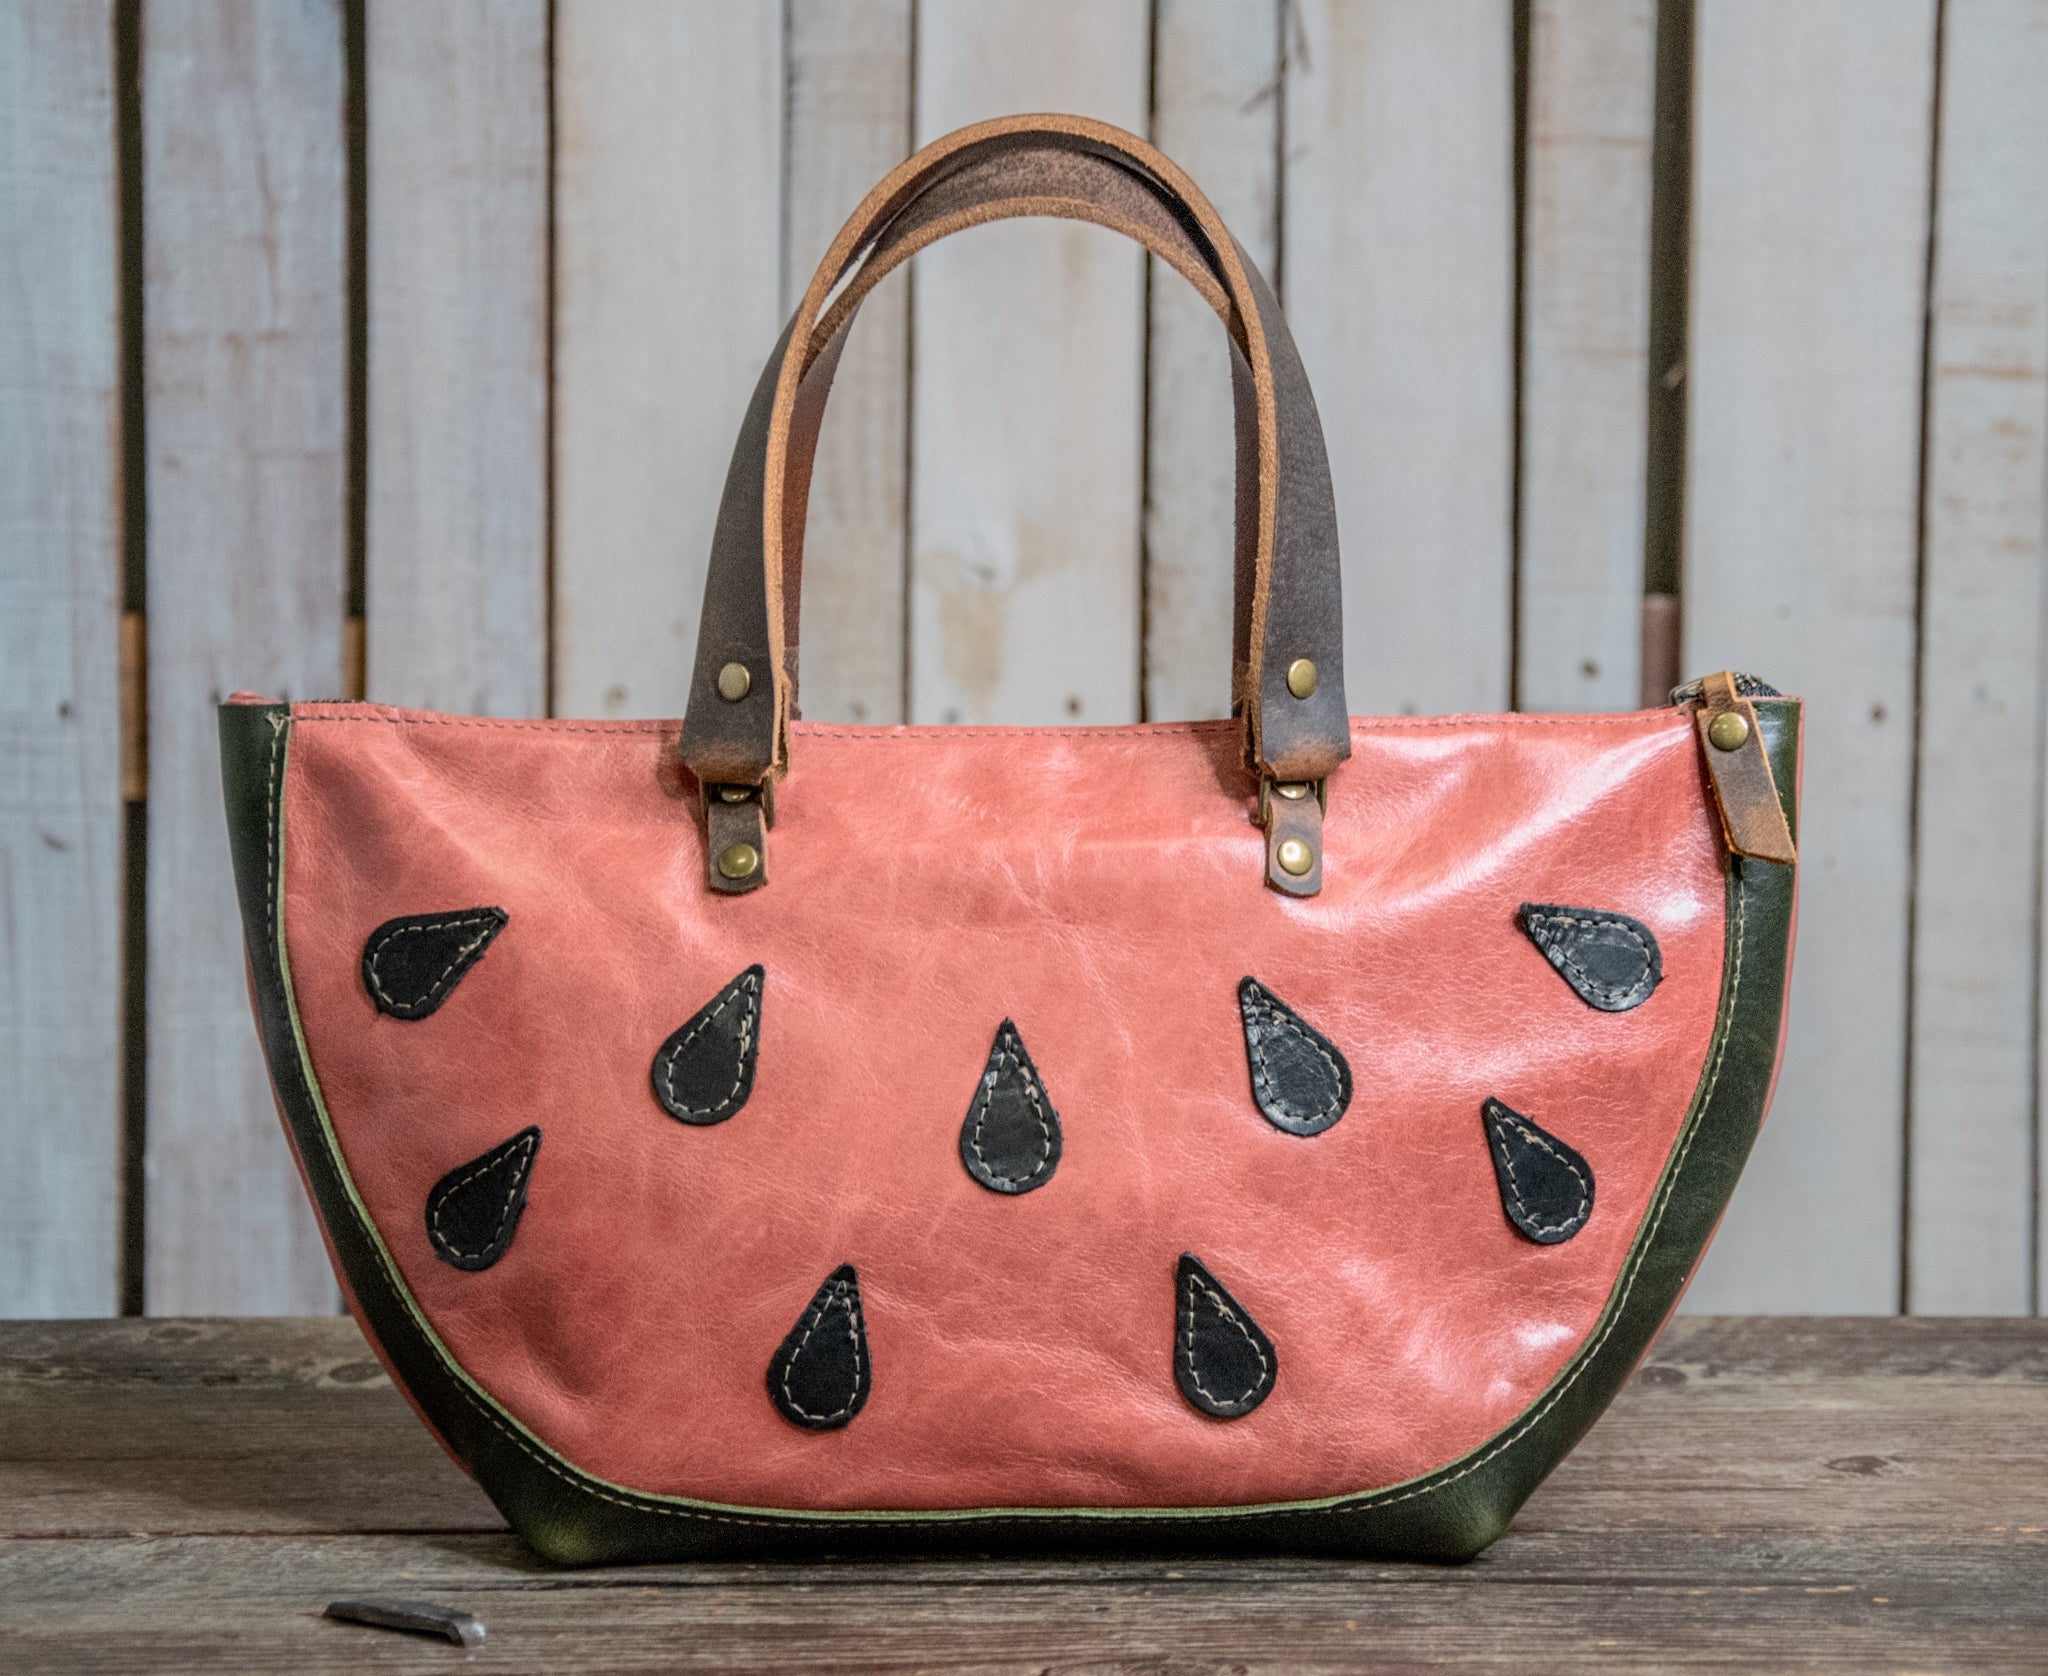 LIMITED | Handmade Leather Tote Bag | SMALL Bowler | Watermelon Bag